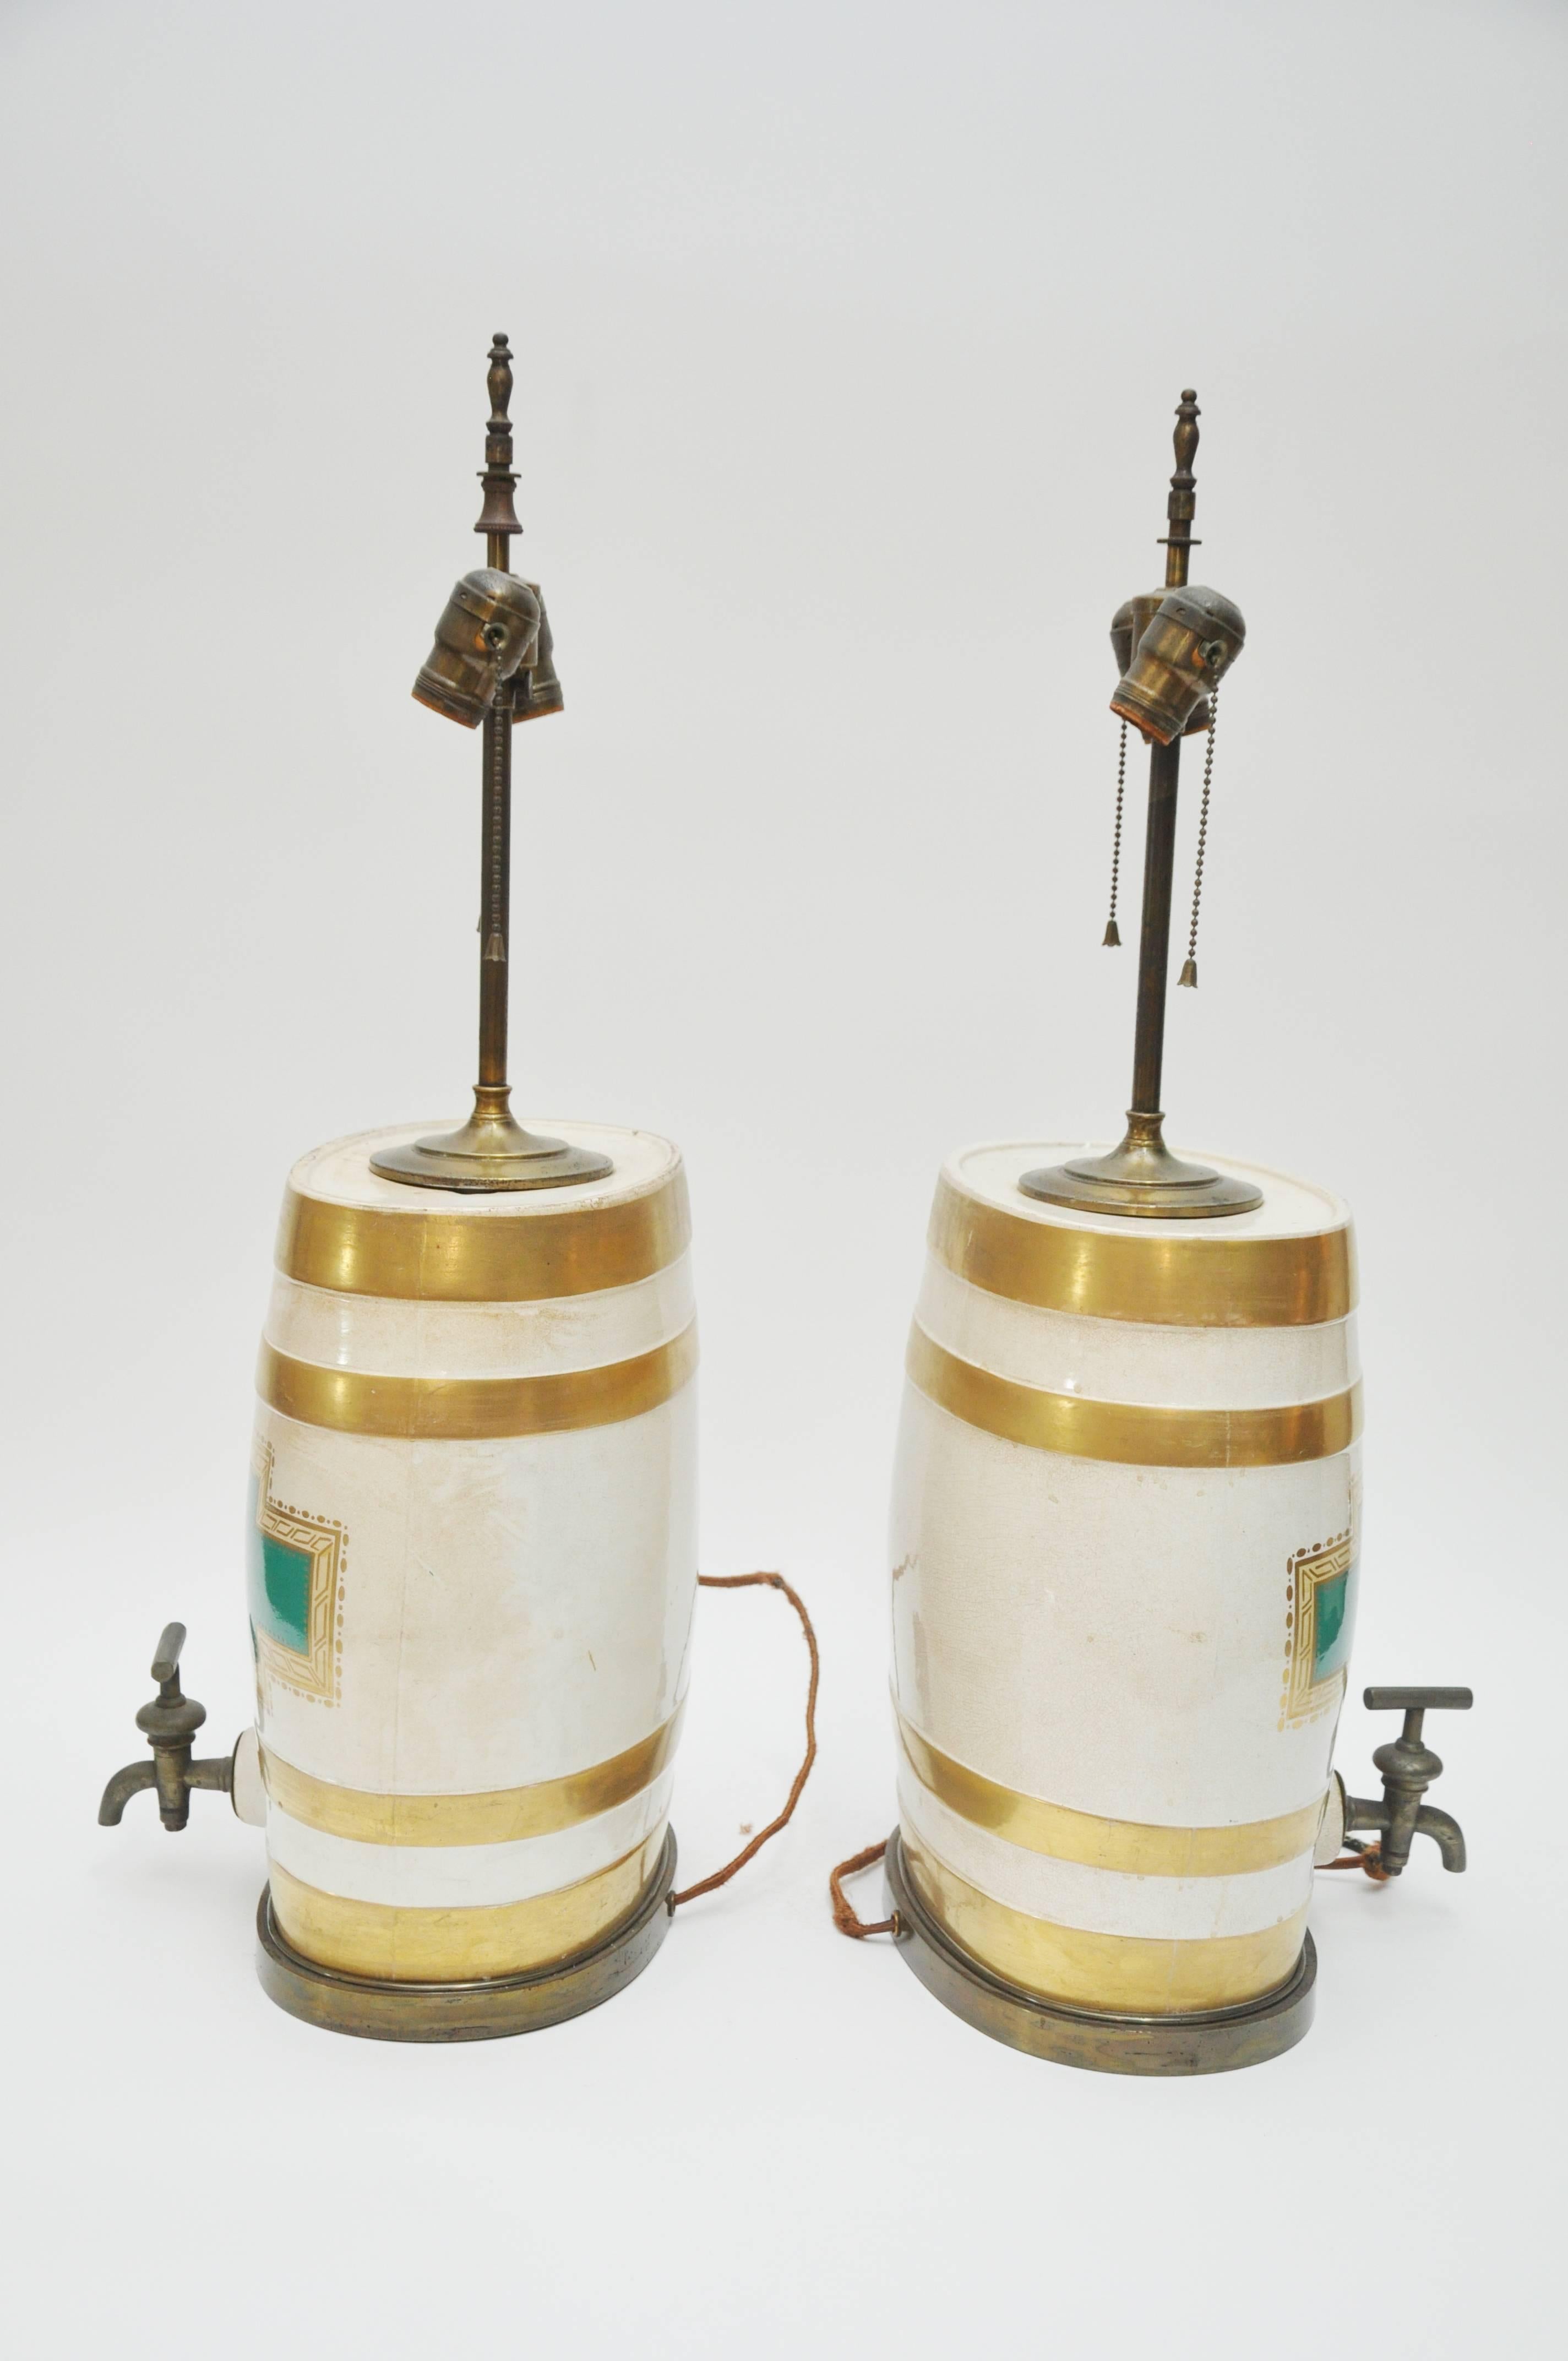 Pair of colorful oval ceramic jug lamps with brass spigot. Transfer ware and gilded decoration.